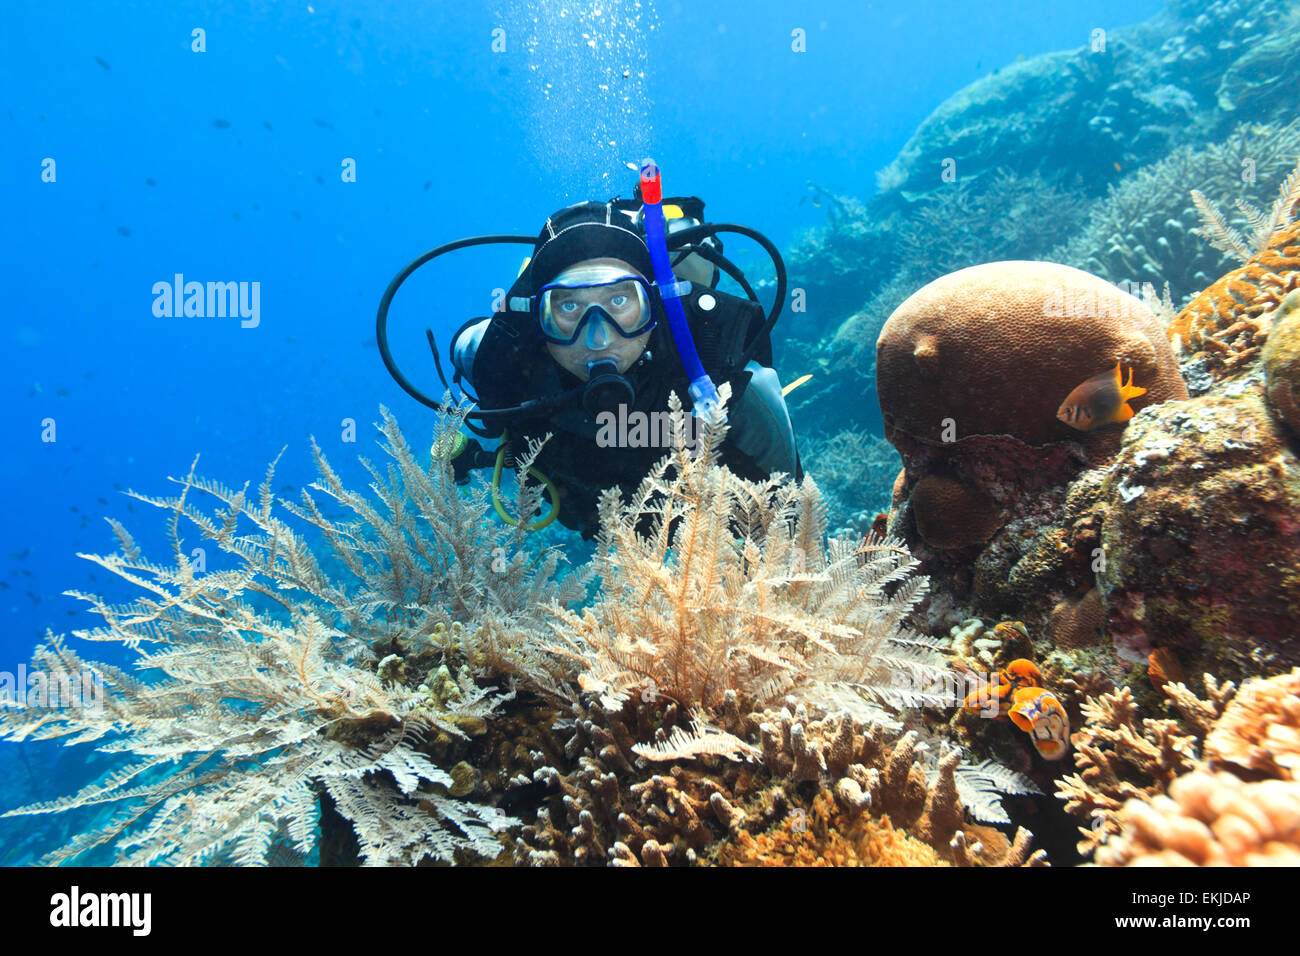 Scuba diver underwater close to coral reef Stock Photo